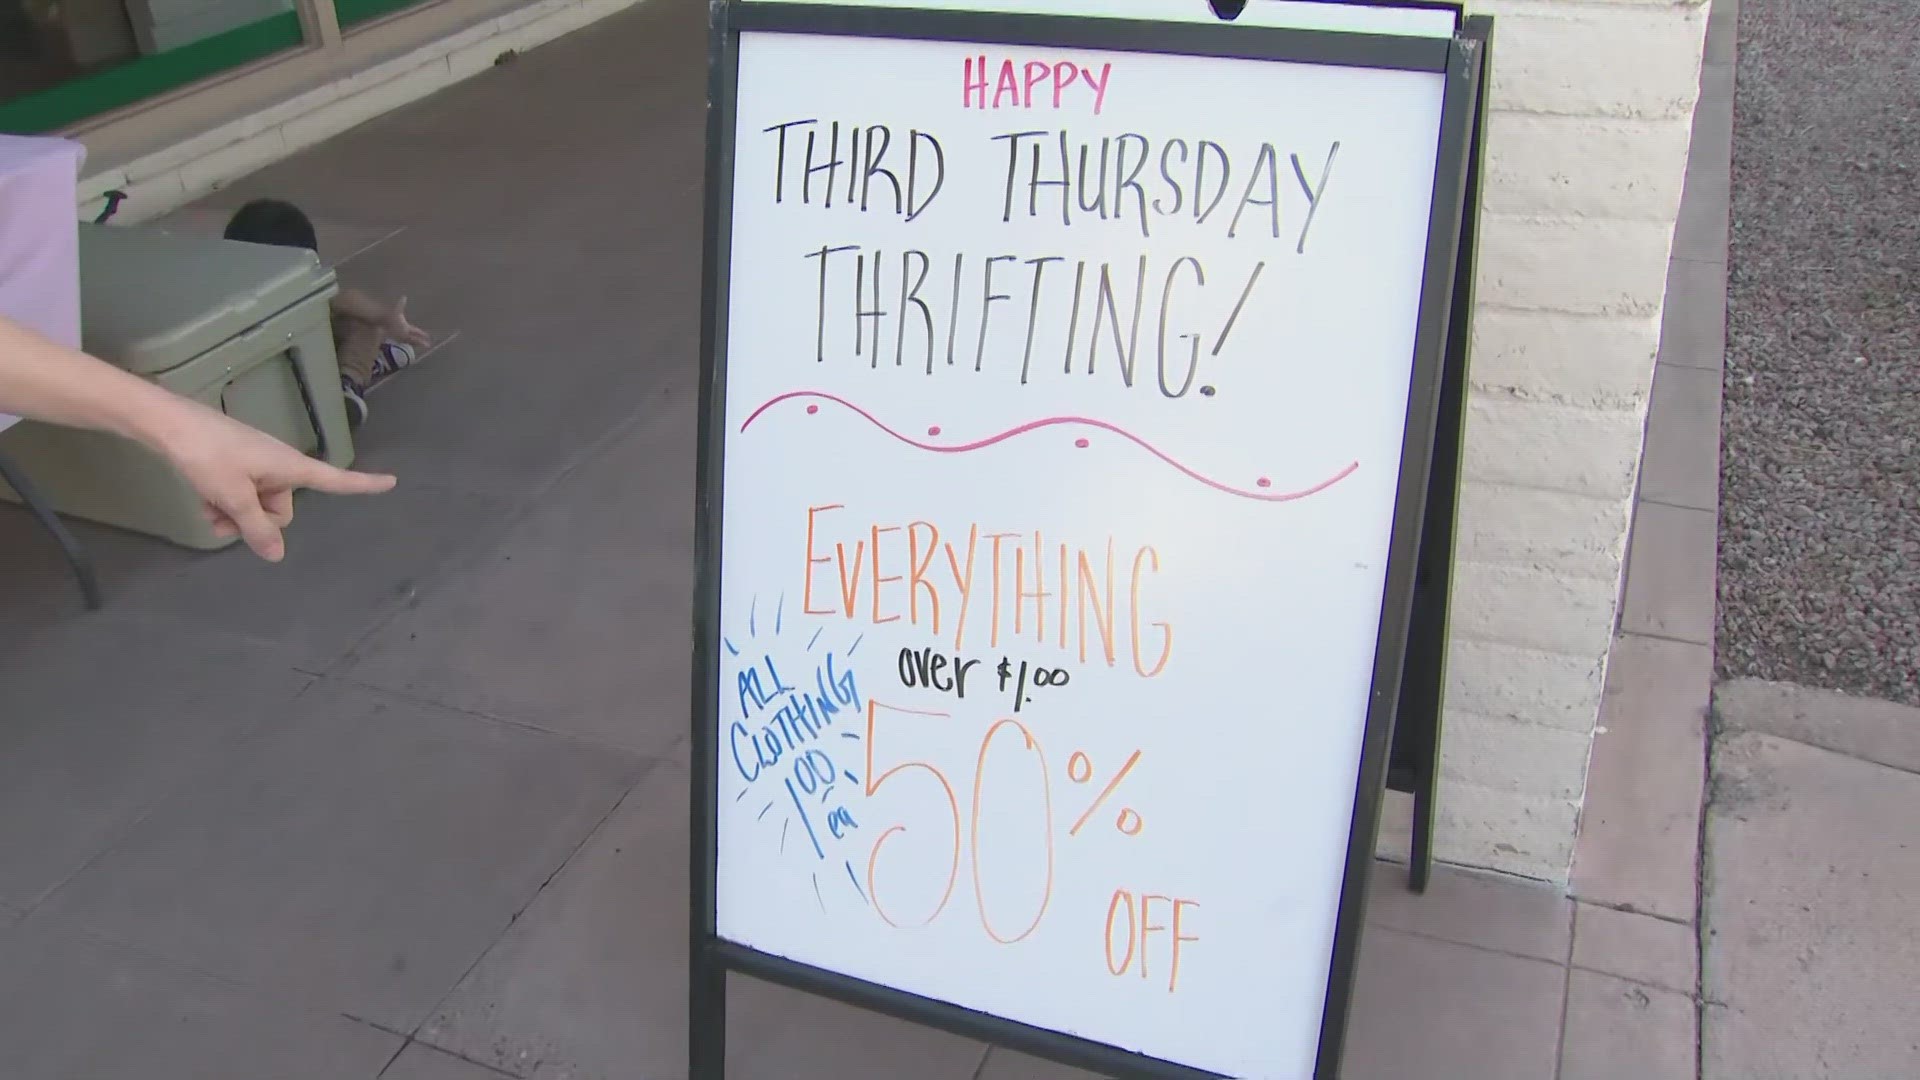 This Valley thrift shop is showcasing their goods while also holding special sales to help others get back on their feet.